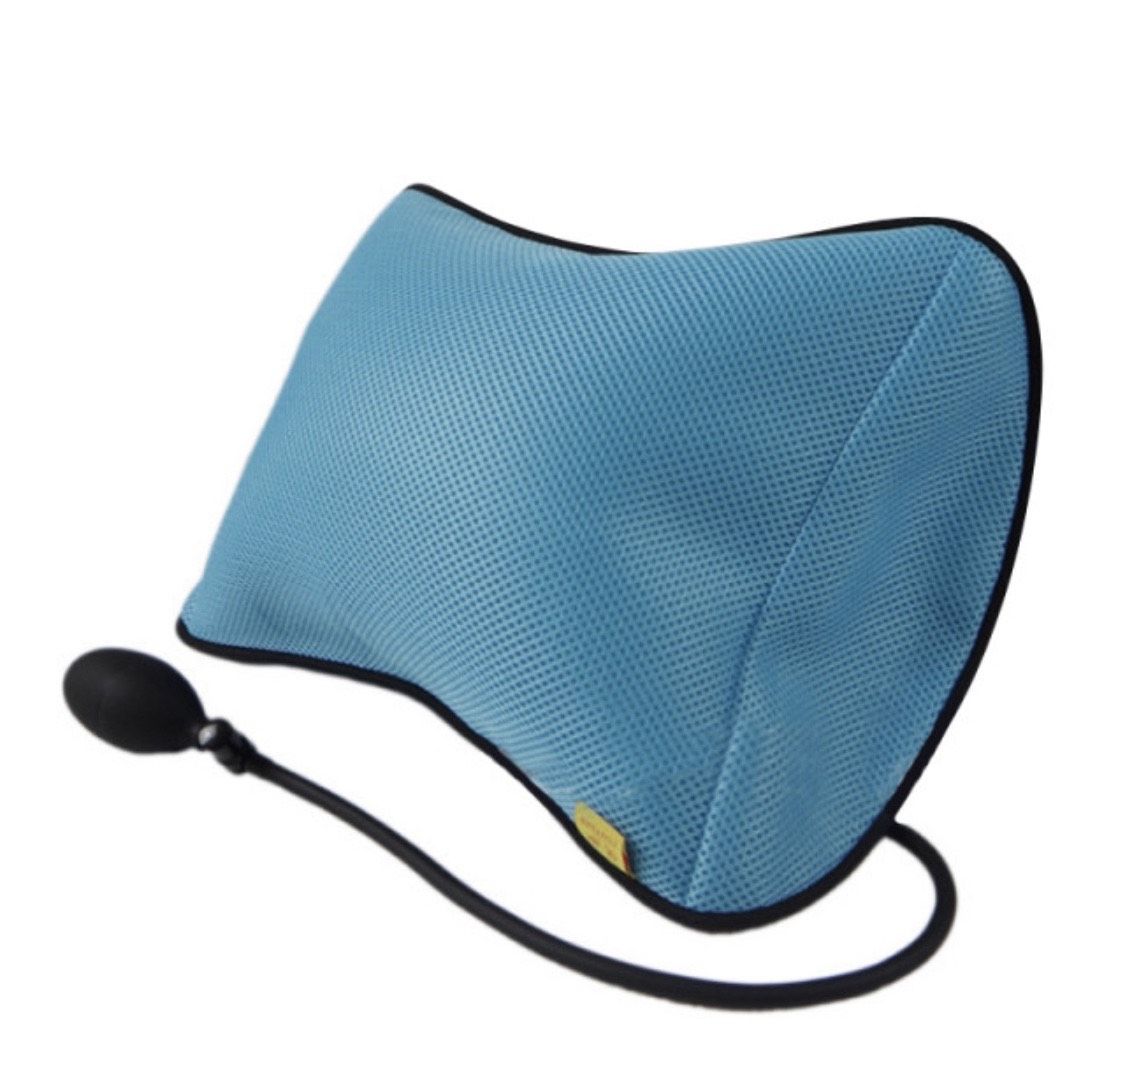 Inflatable lumbar support cushion